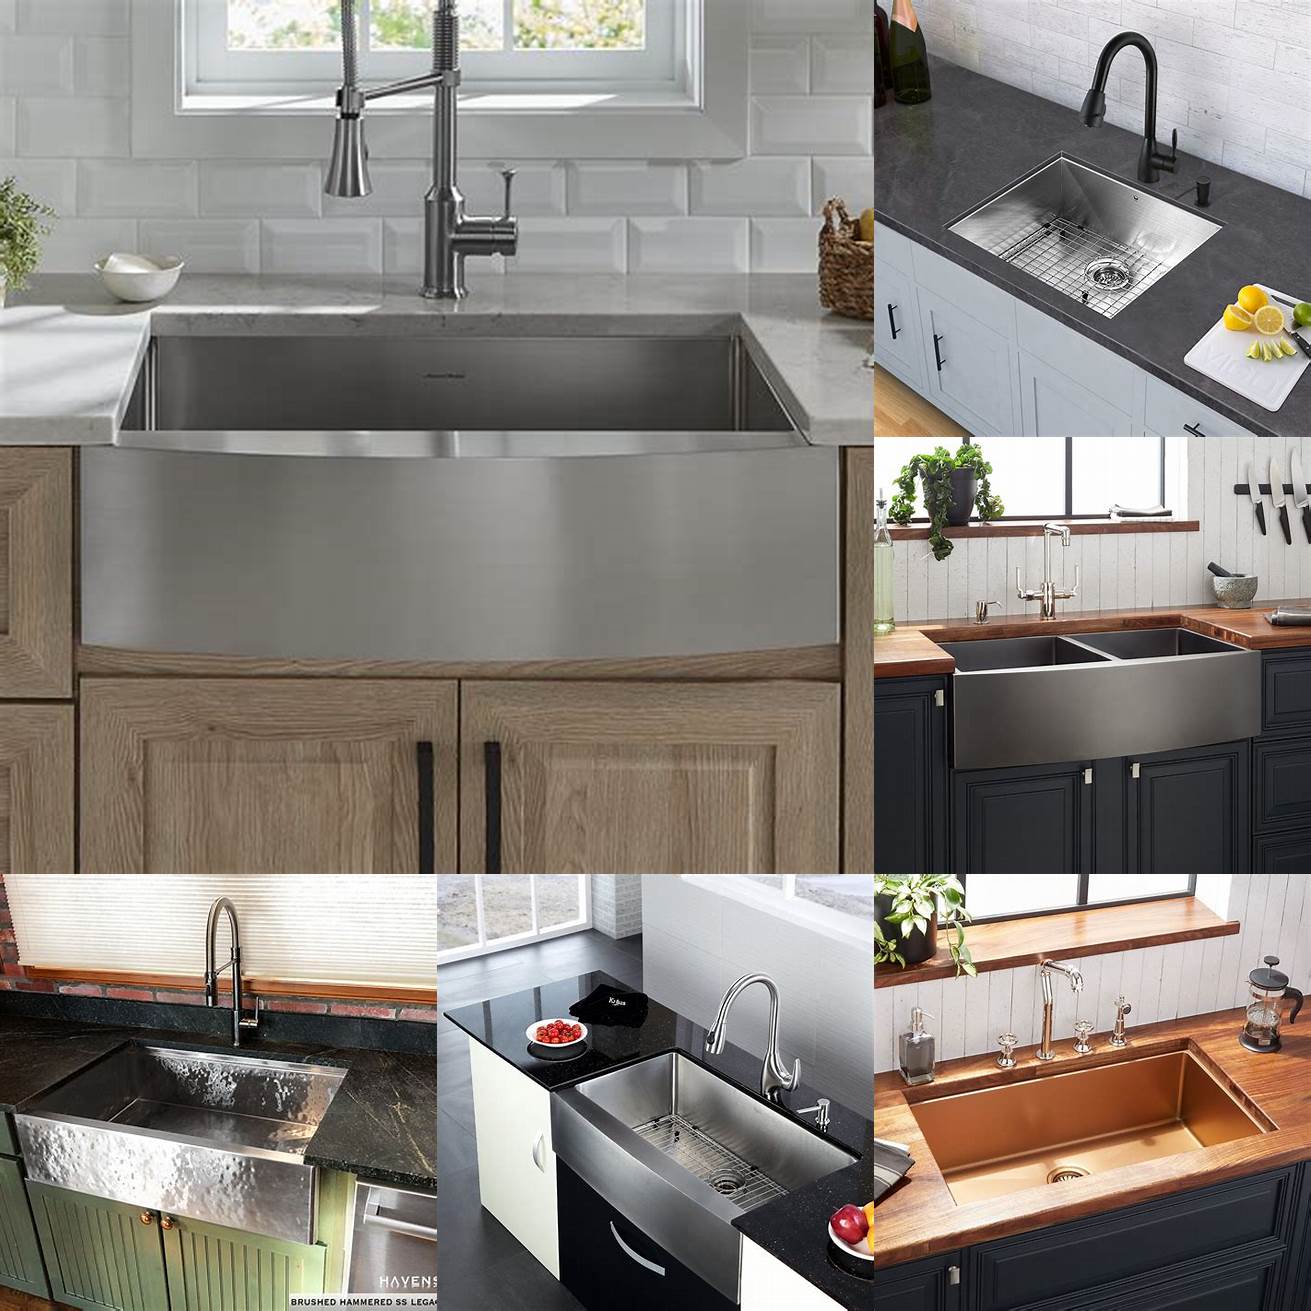 Less Color Variety Unlike other sink materials stainless steel sinks only come in one color - silver If youre looking for a sink that matches your kitchens color scheme or adds a pop of color a stainless steel sink may not be the best choice for you